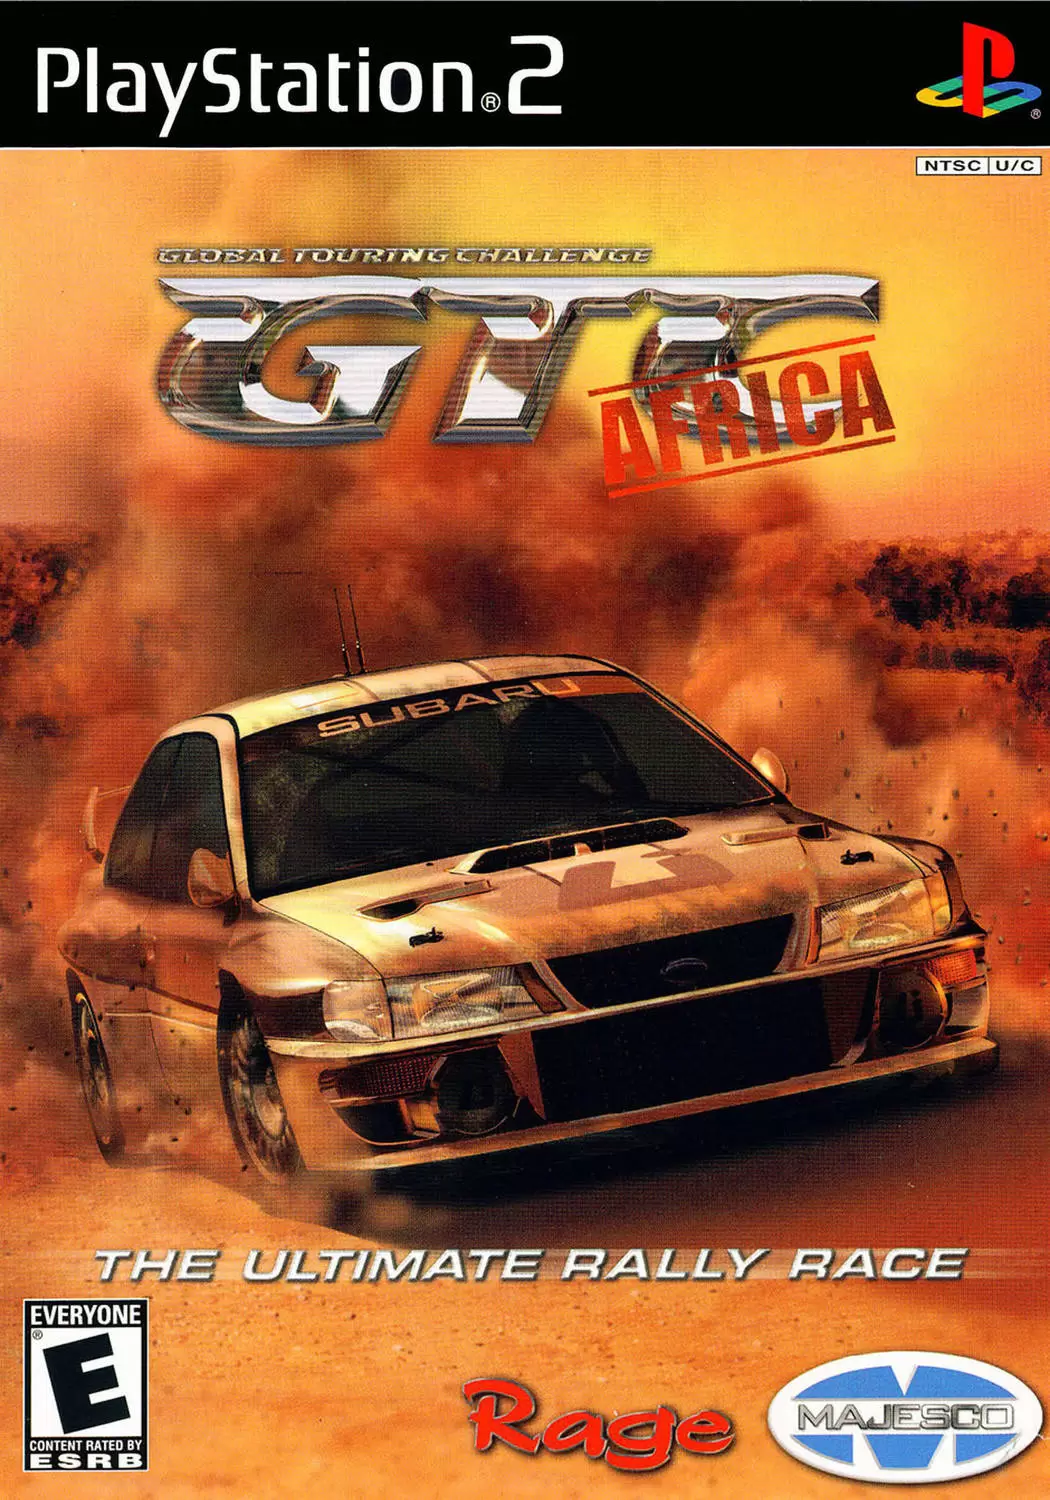 PS2 Games - GTC: Africa